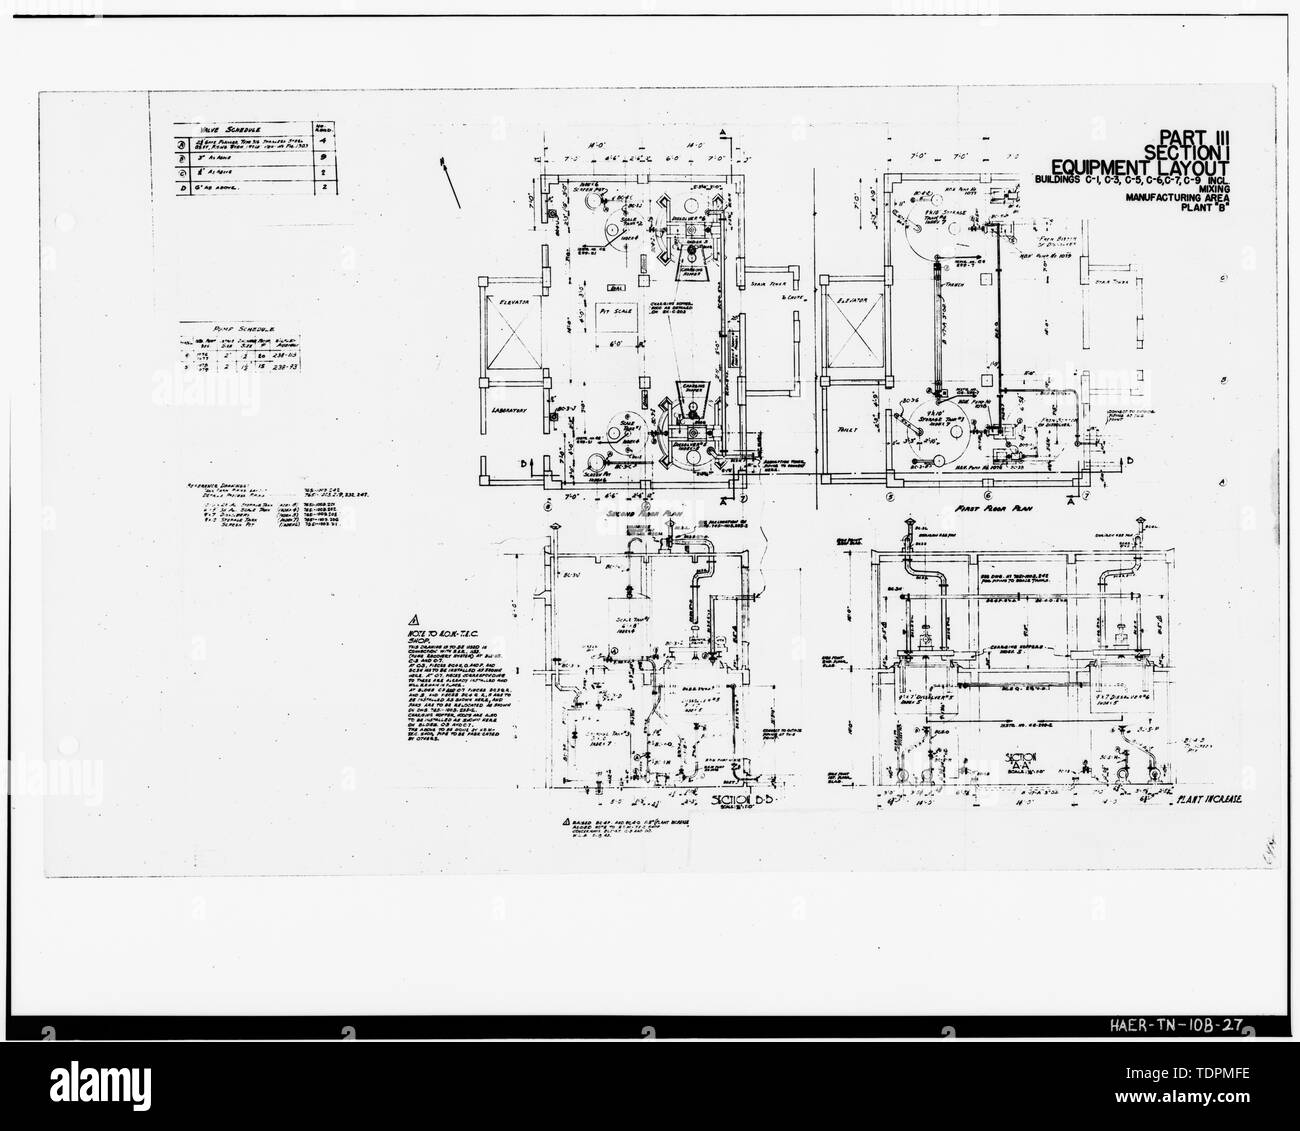 Photograph of a line drawing. '(PLAN LAYOUT AND CROSS SECTION OF) PART III, SECTION 1, EQUIPMENT LAYOUT, BUILDINGS C-1, C-3, C-5, C-6, C-7, C-9 INCL., MIXING, MANUFACTURING AREA, PLANT 'B'.' From the U.S. Army Corps of Engineers. Industrial Facilities Inventory, Holston Ordnance Works, Kingsport, Tennessee. Plant B, Parts II, III. (Nashville, TN- Office of the District Engineer, 1944). - Holston Army Ammunition Plant, RDX-and-Composition-B Manufacturing Line 9, Kingsport, Sullivan County, TN; Bachmann                              , Werner E; Tennessee Eastman Corporation; U.S. Department of th Stock Photo